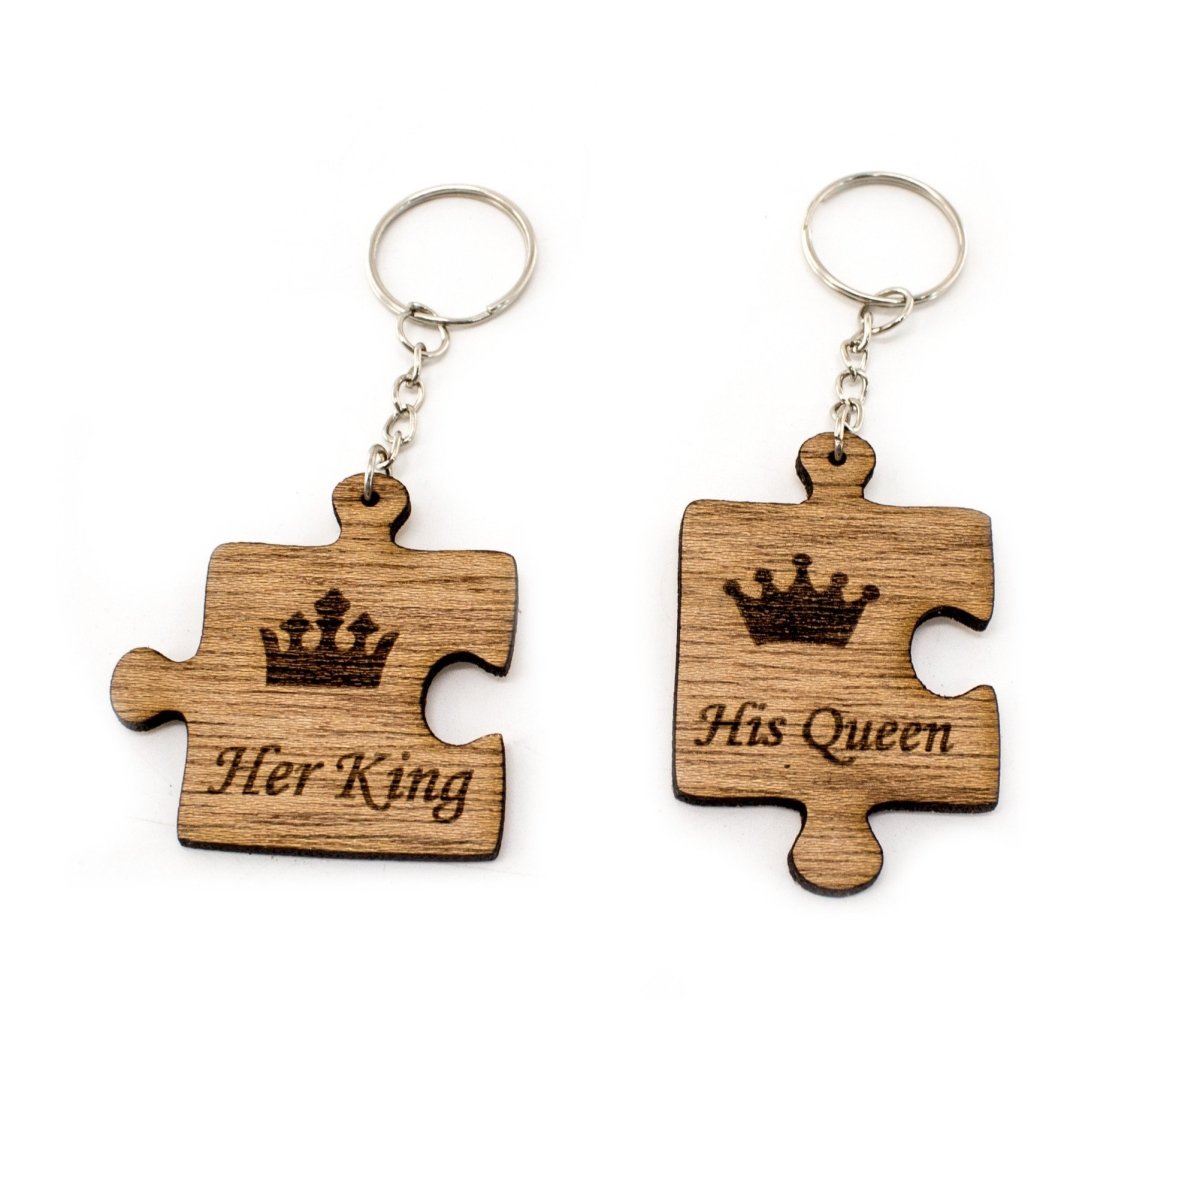 King & Queen Wooden Keyrings | His Queen/Her King Keychains | Couples Keyring Set - Wooderland